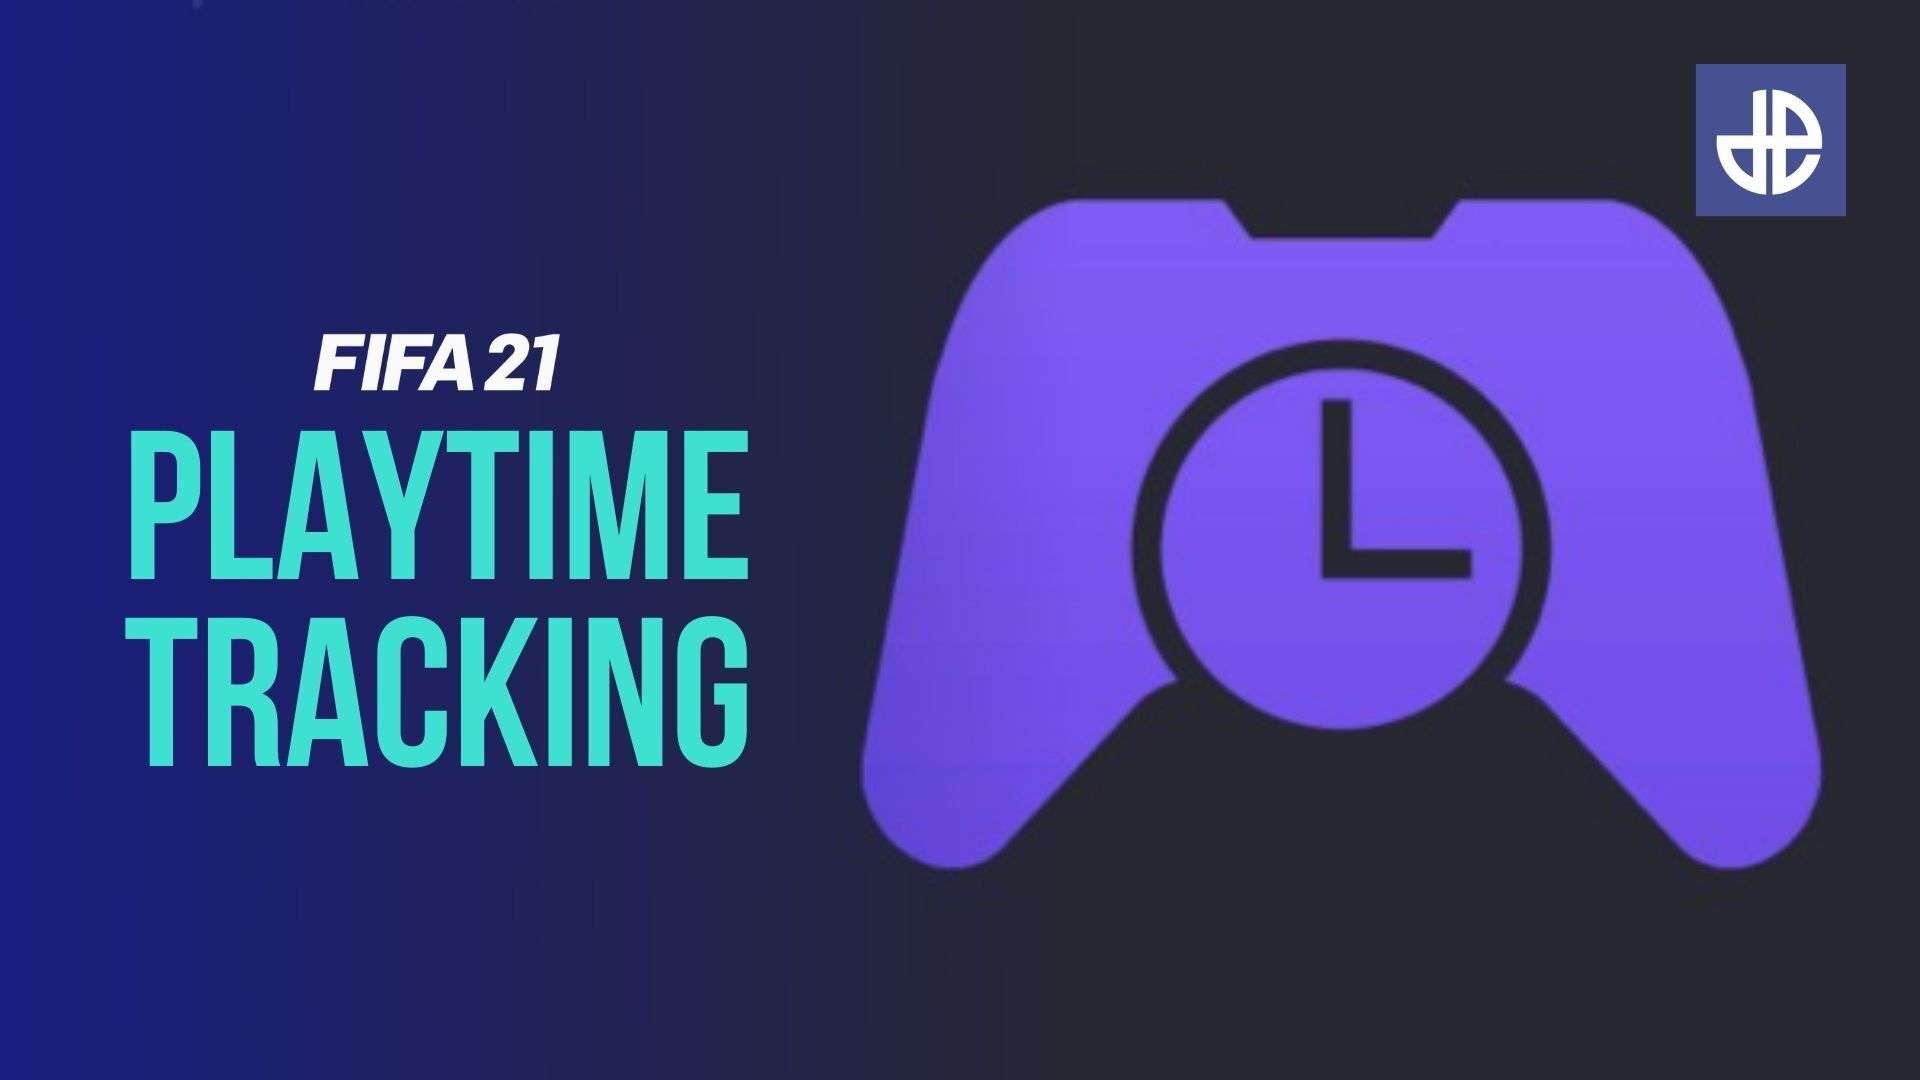 FIFA 21 Playtime tracking header